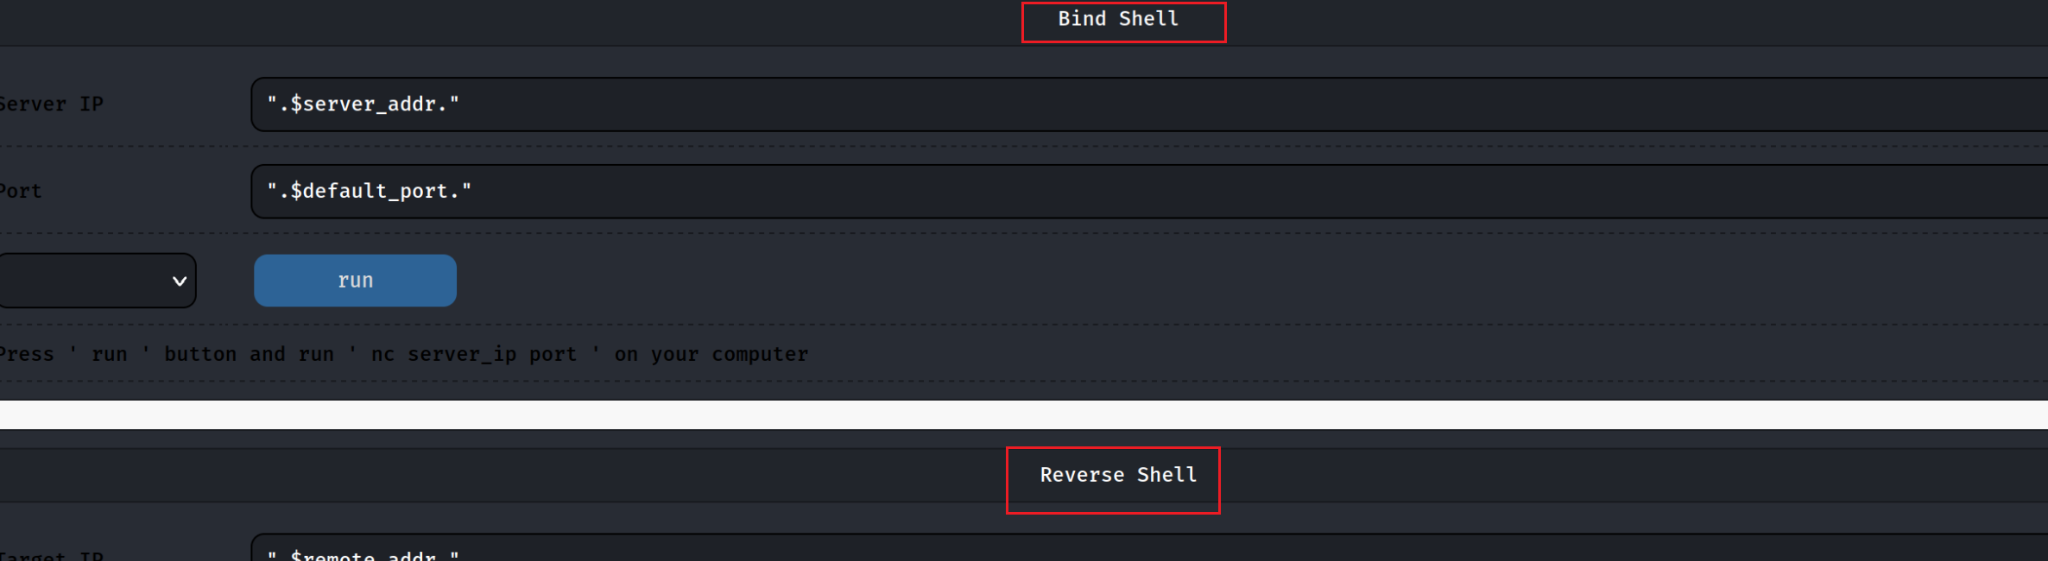 Image 15 is a screenshot of the PHP webshell with “Bind Shell” and “Reverse Shell” highlighted. 